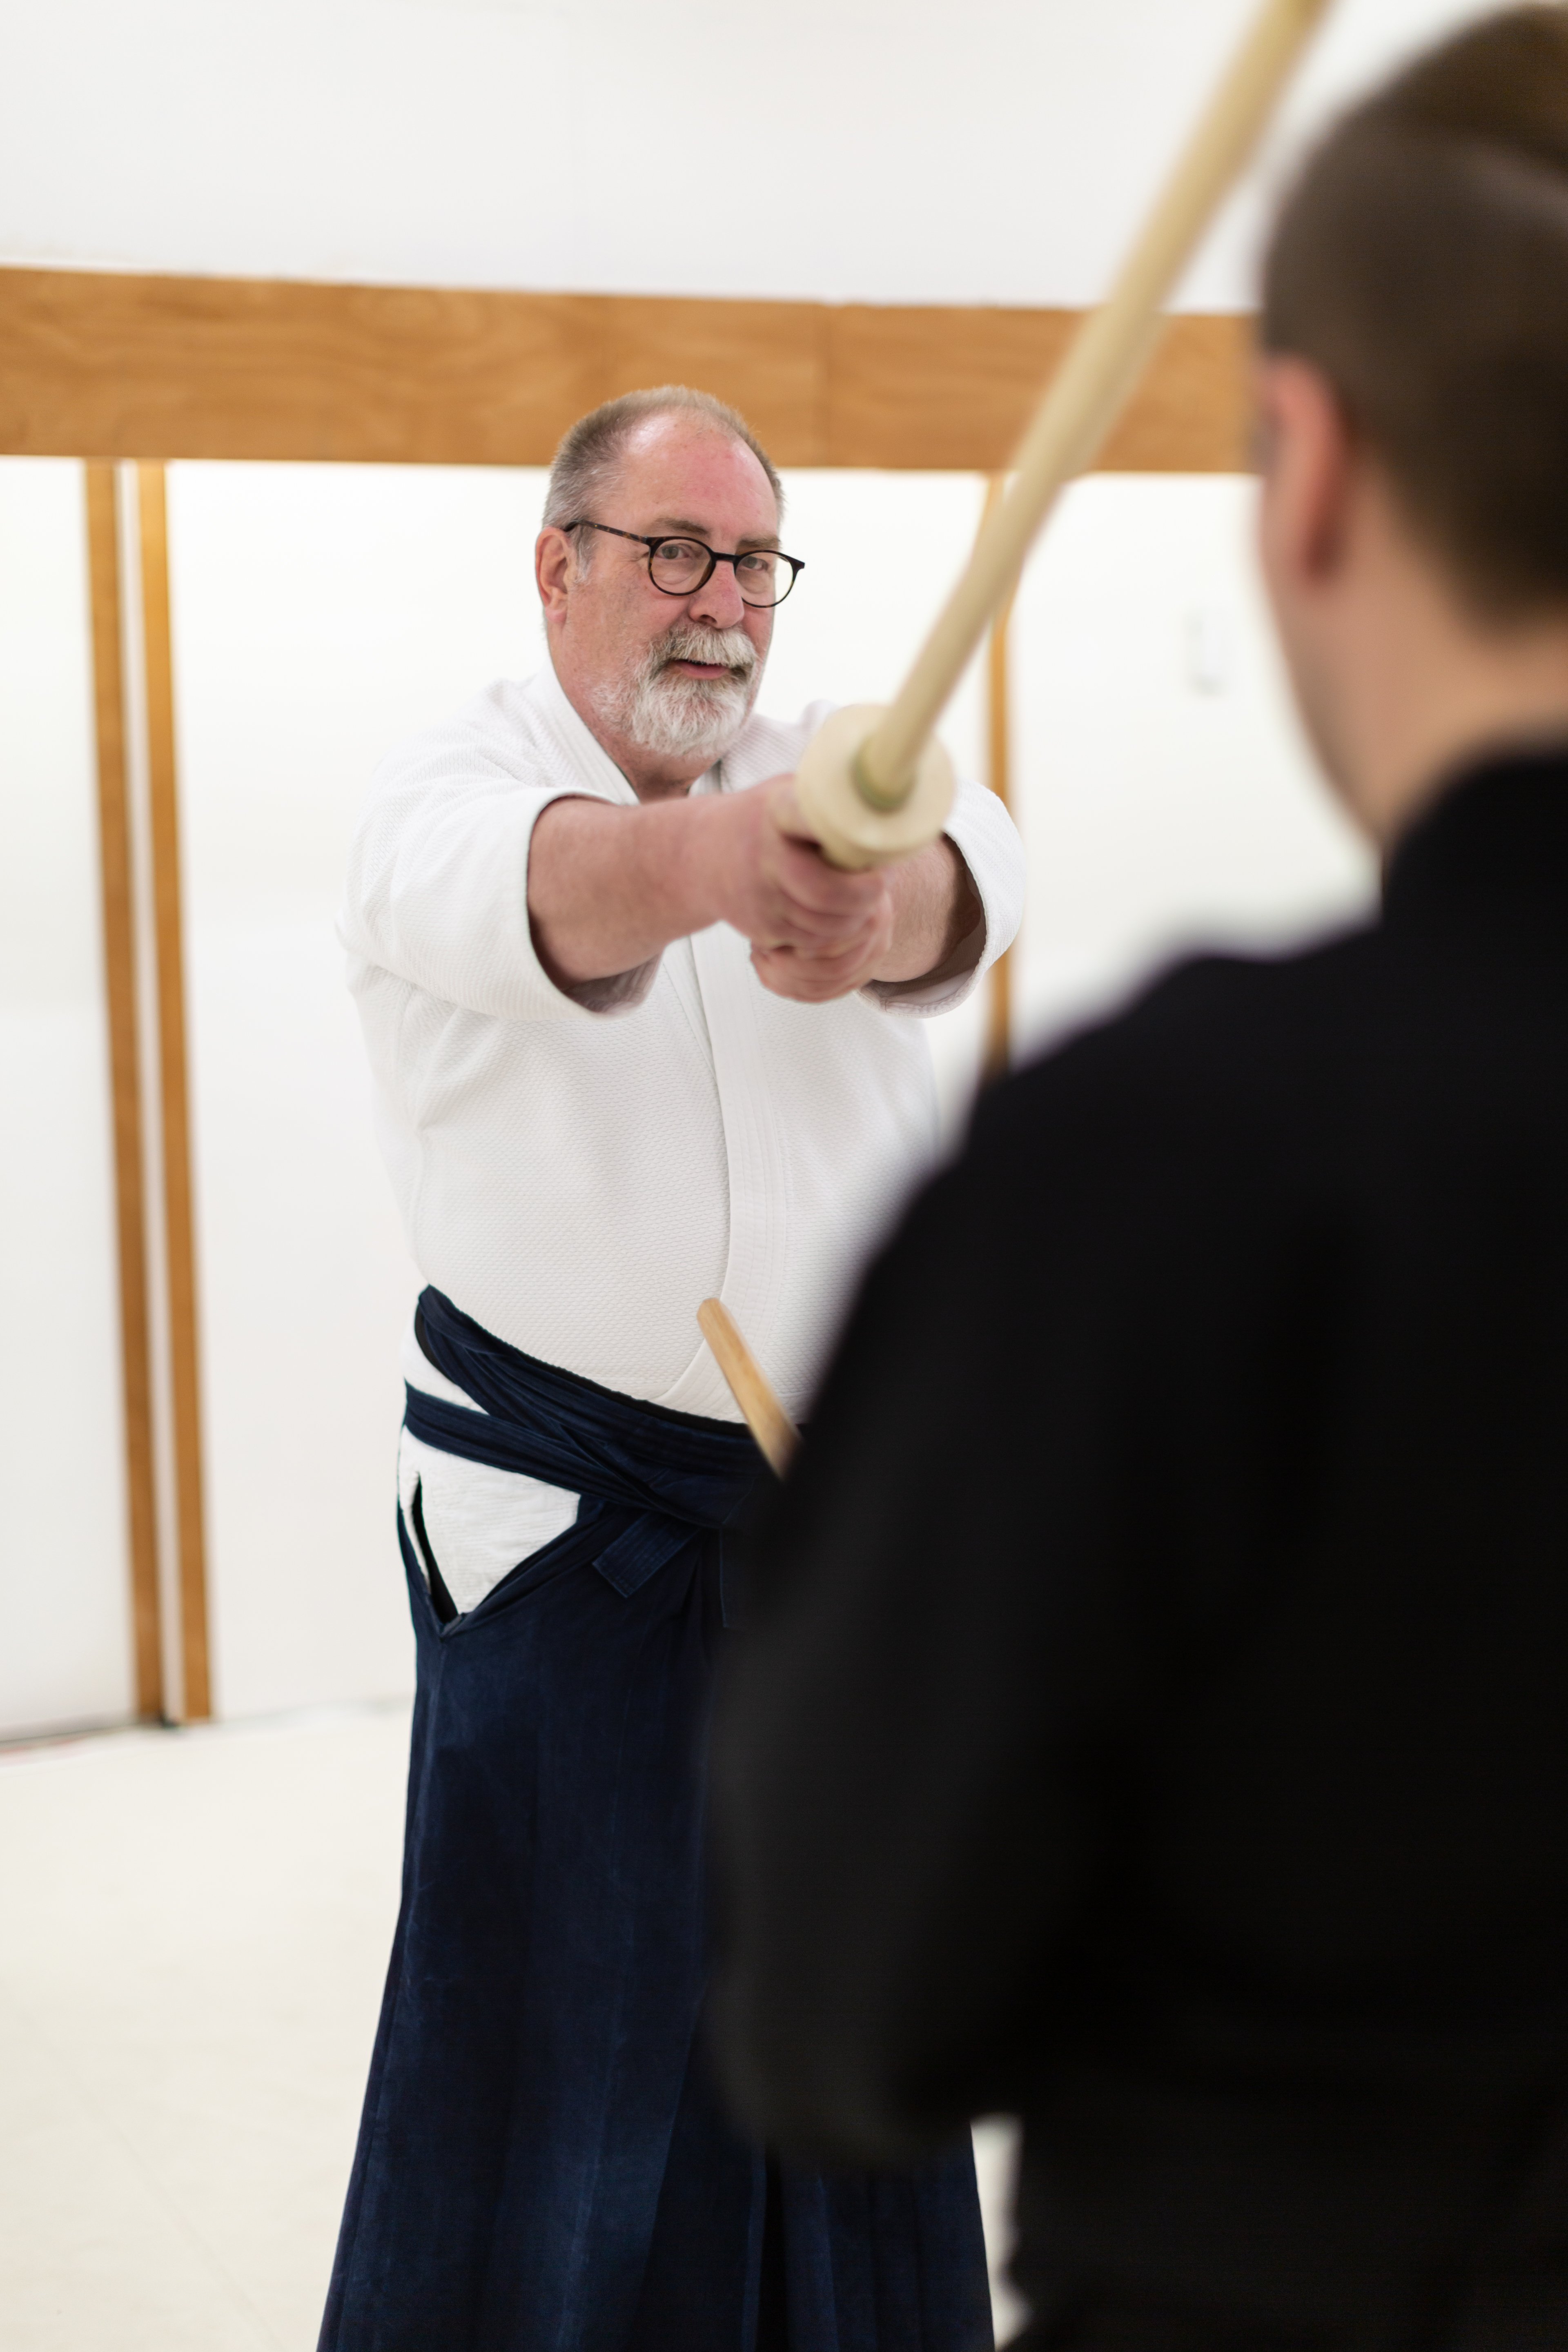 Aikido and Iai-do classes for all